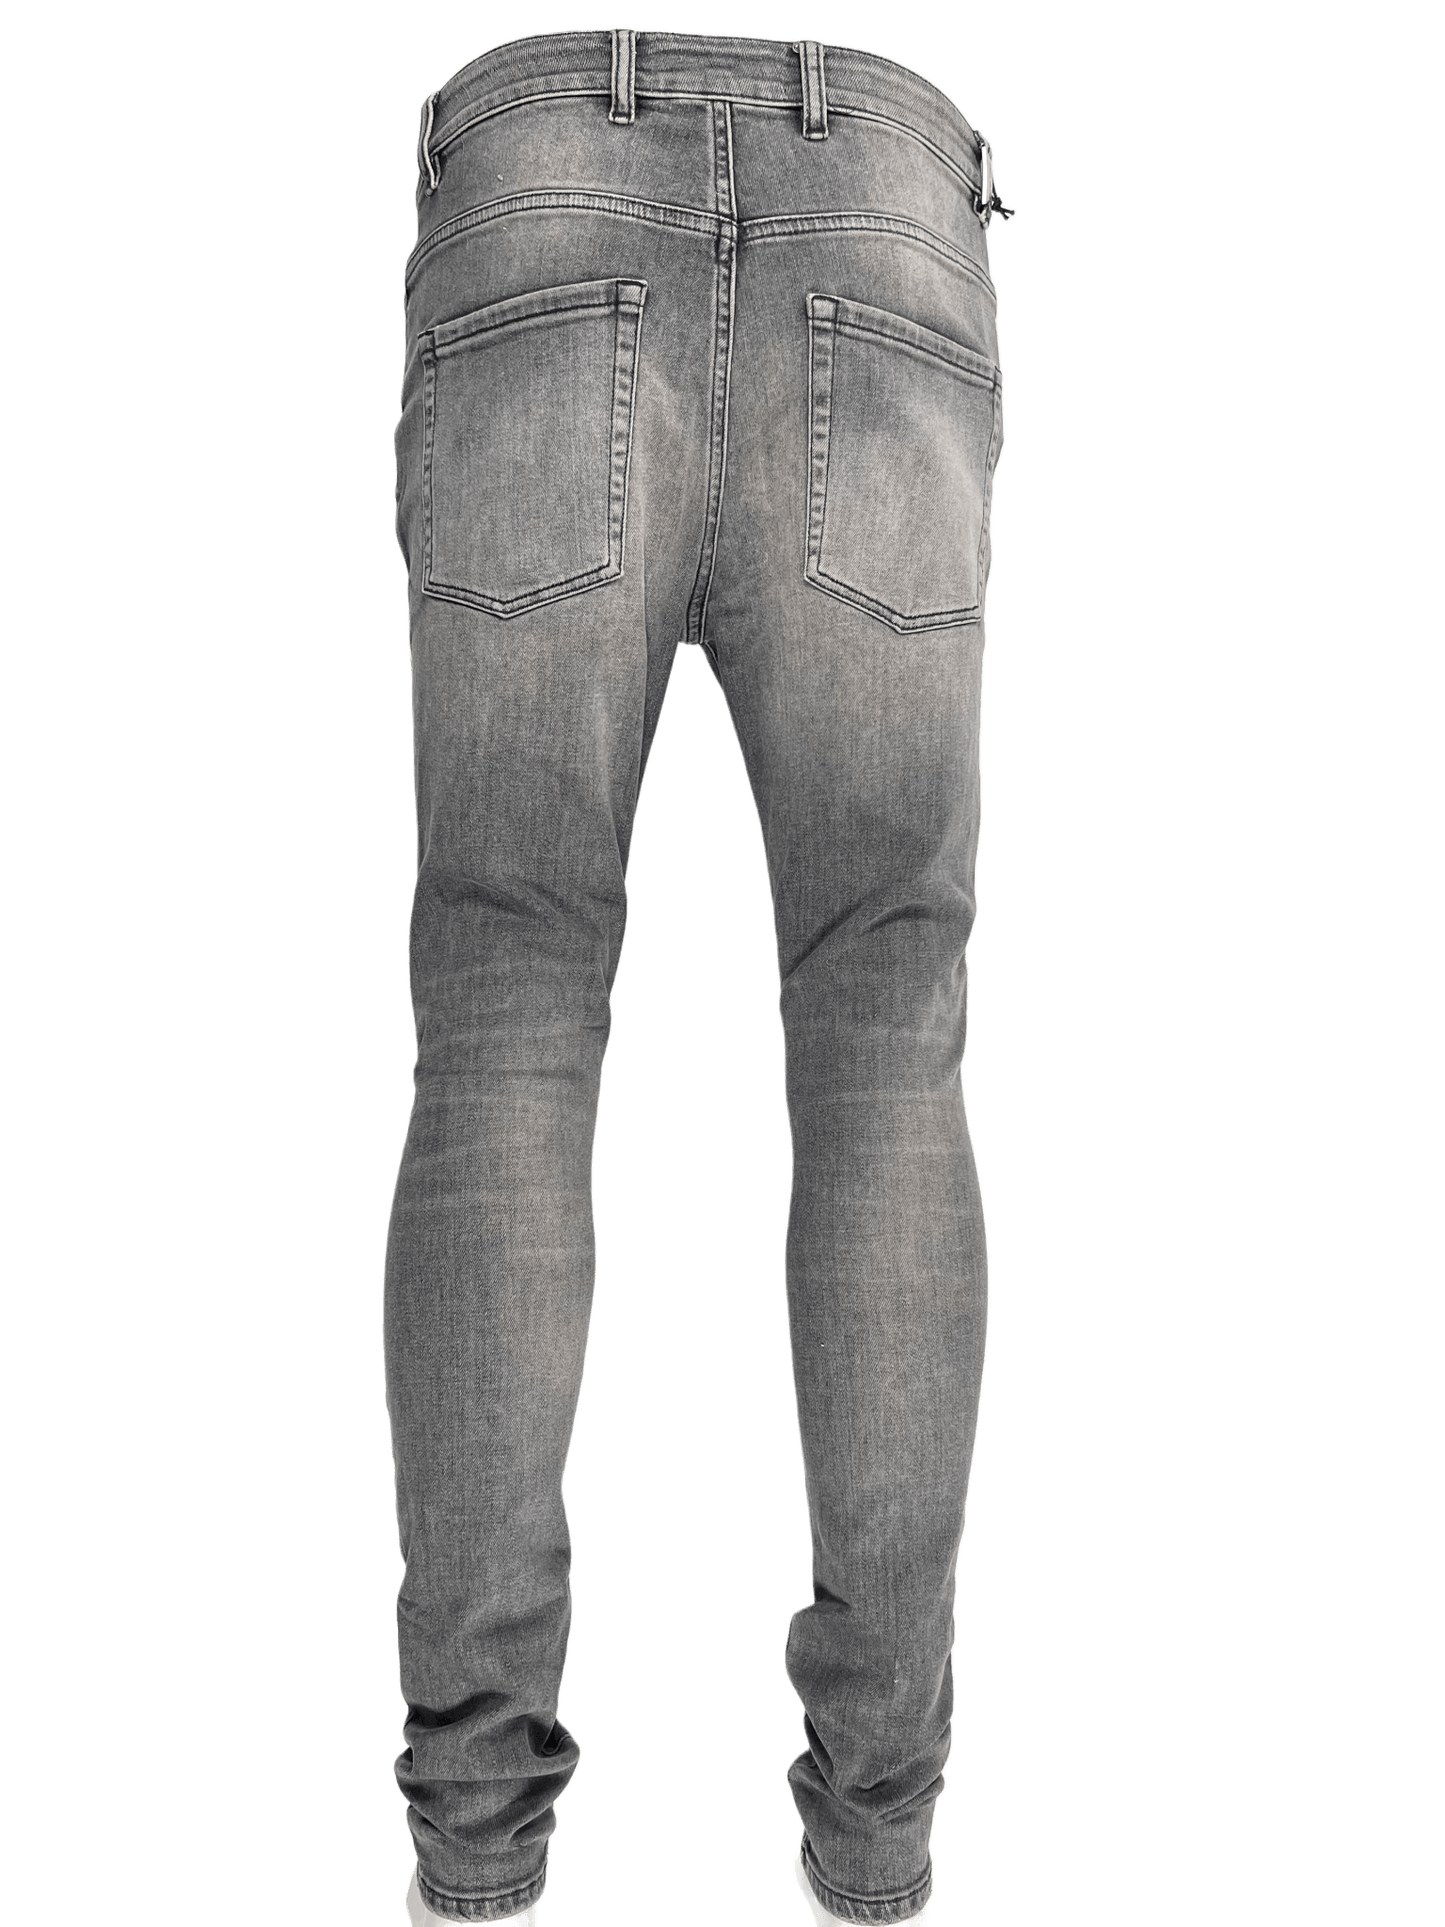 The back view of a pair of REPRESENT M07044 DESTROYER DENIM GREY skinny fit jeans.